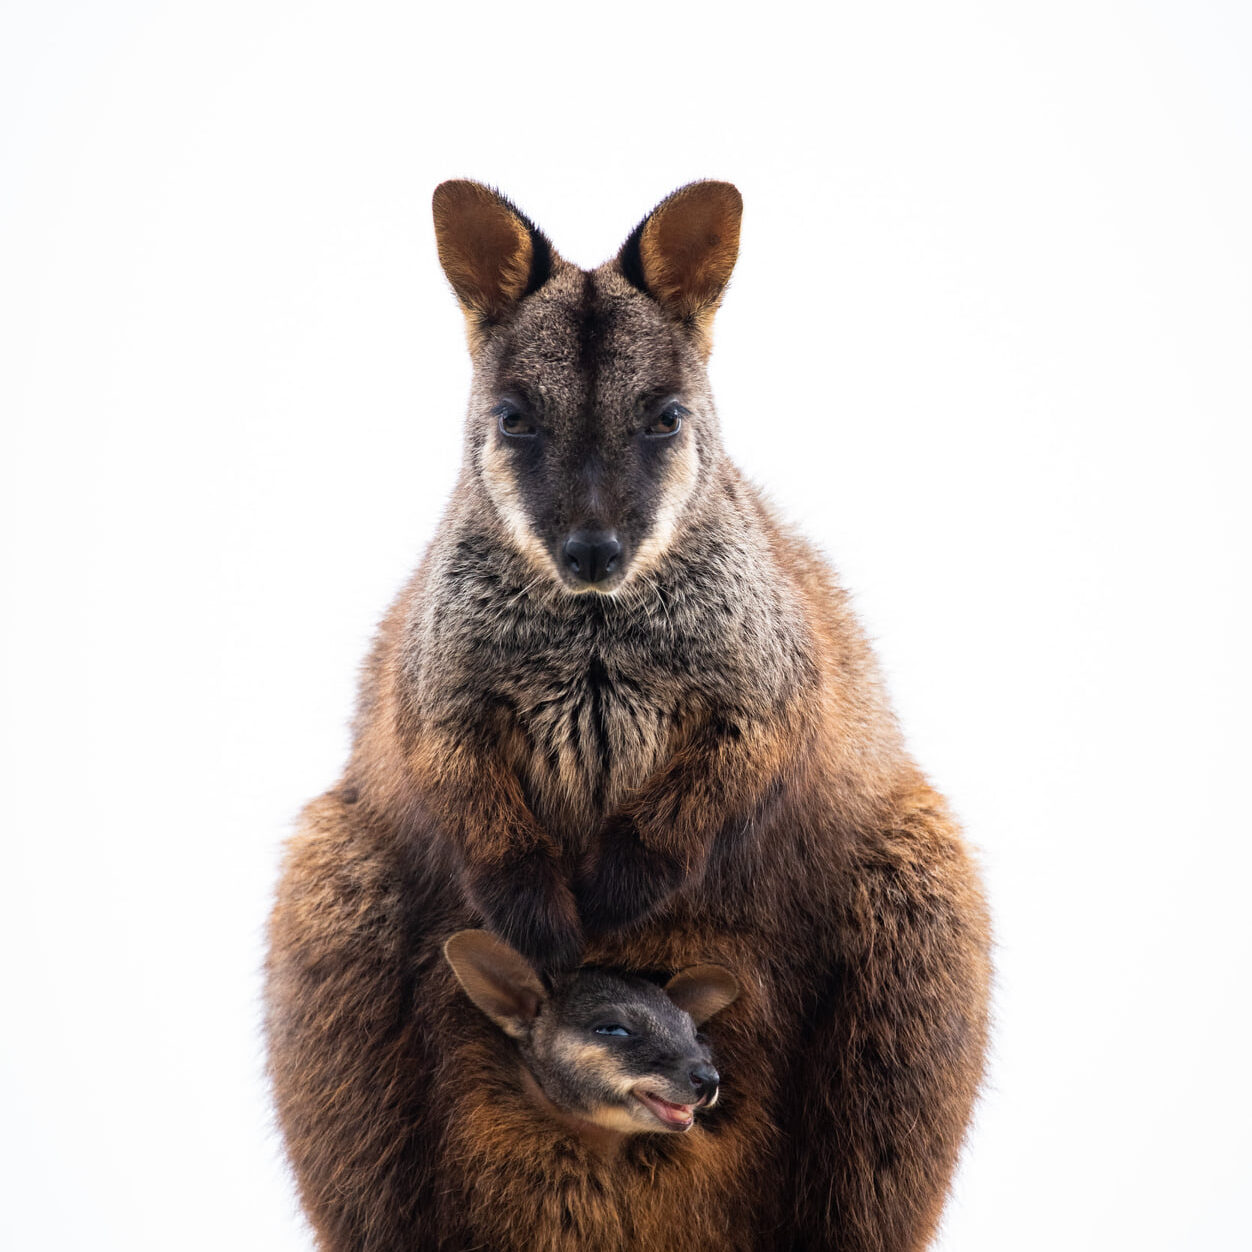 A Southern Brush-tailed Rock-wallaby and her pouched young. Photo by Annette Ruzicka